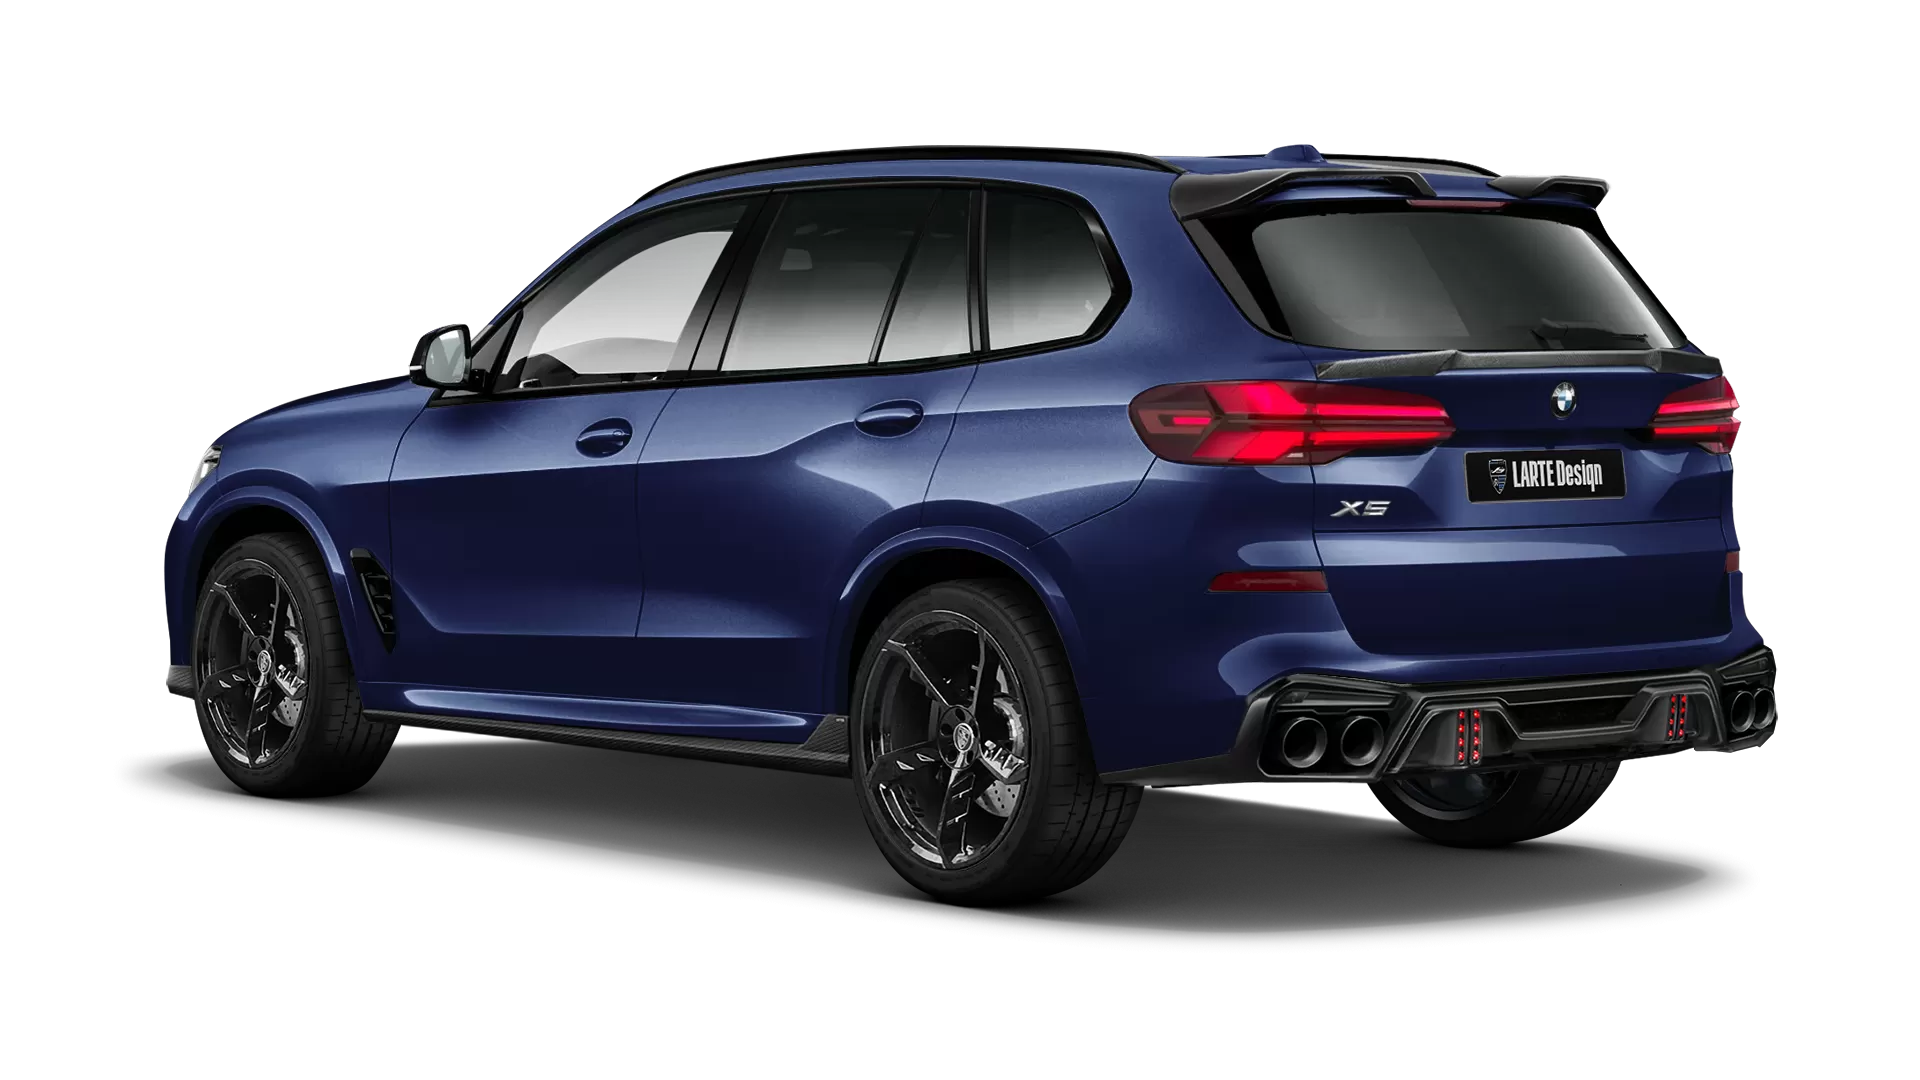 BMW X5 G05 LCI Facelift with carbon body kit: back view shown in Tanzanite Blue